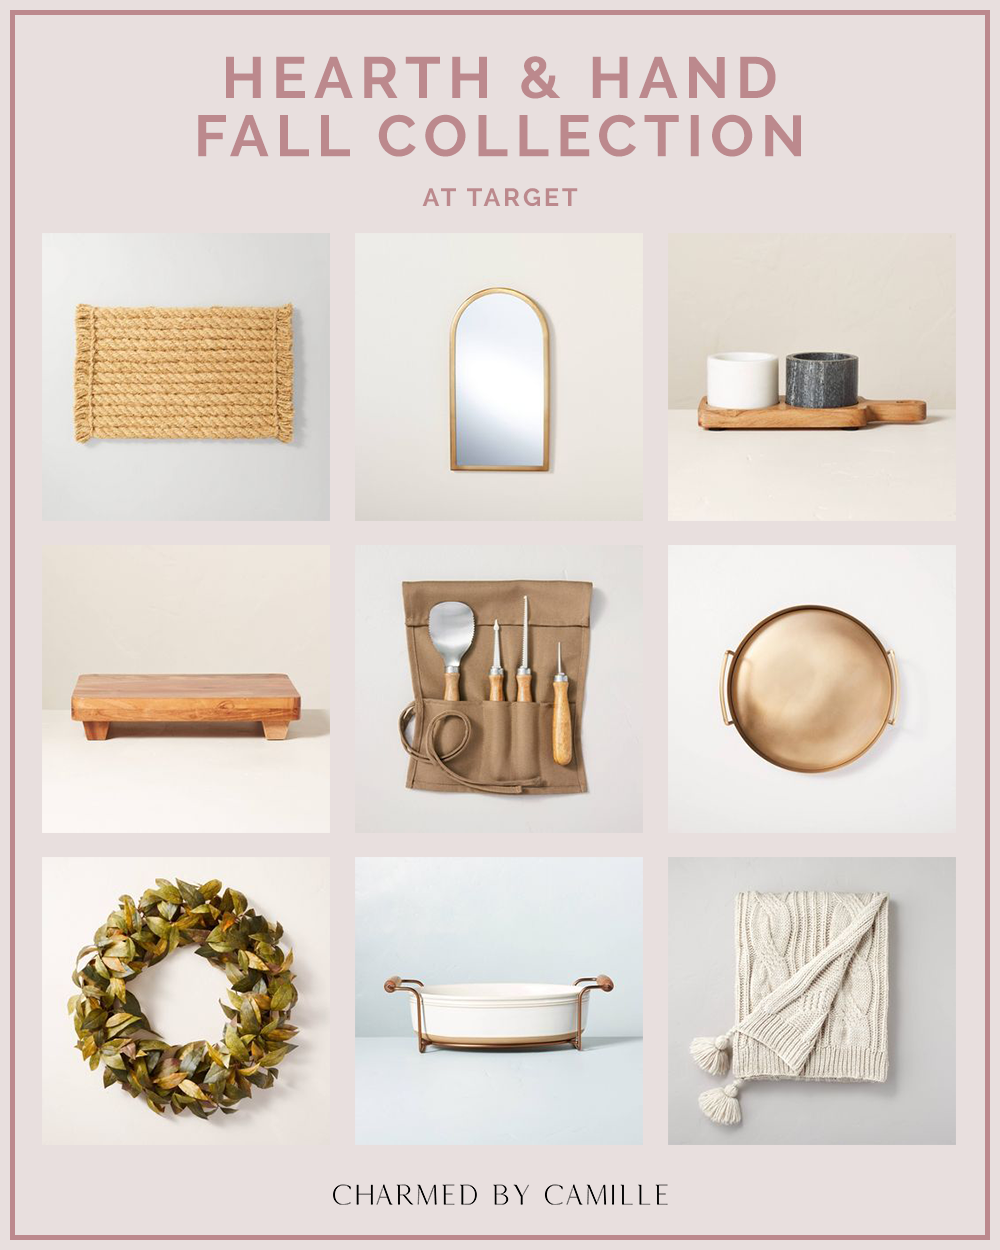 New at Target The Hearth & Hand Fall Collection